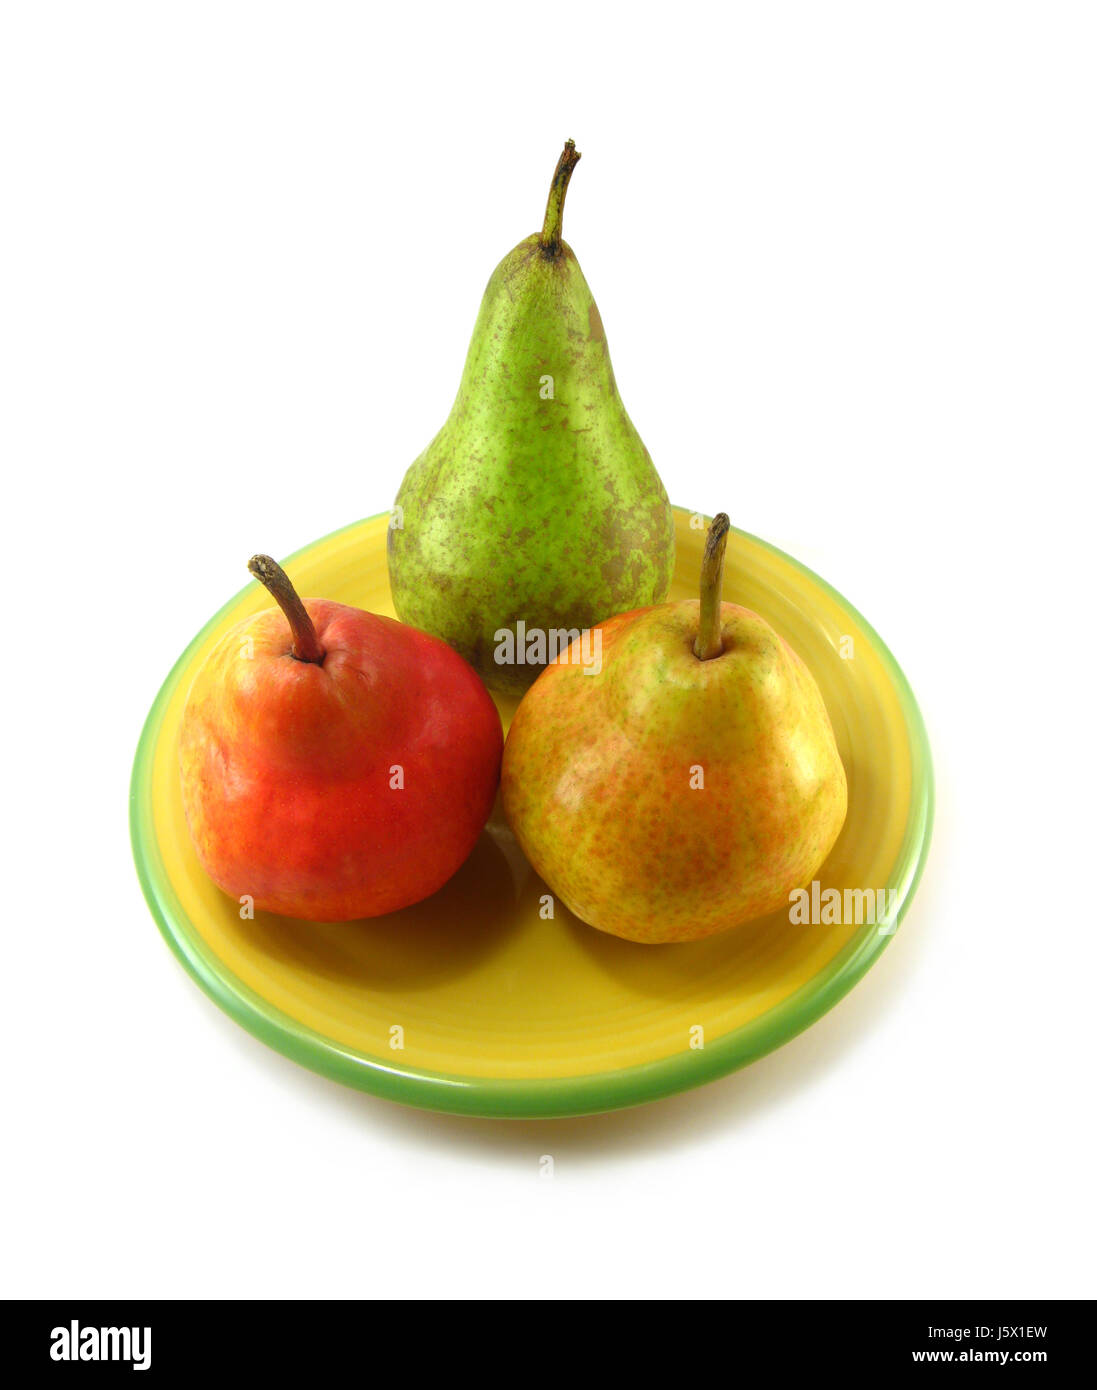 food aliment progenies fruits fruit diet pear bulb pears food aliment health Stock Photo